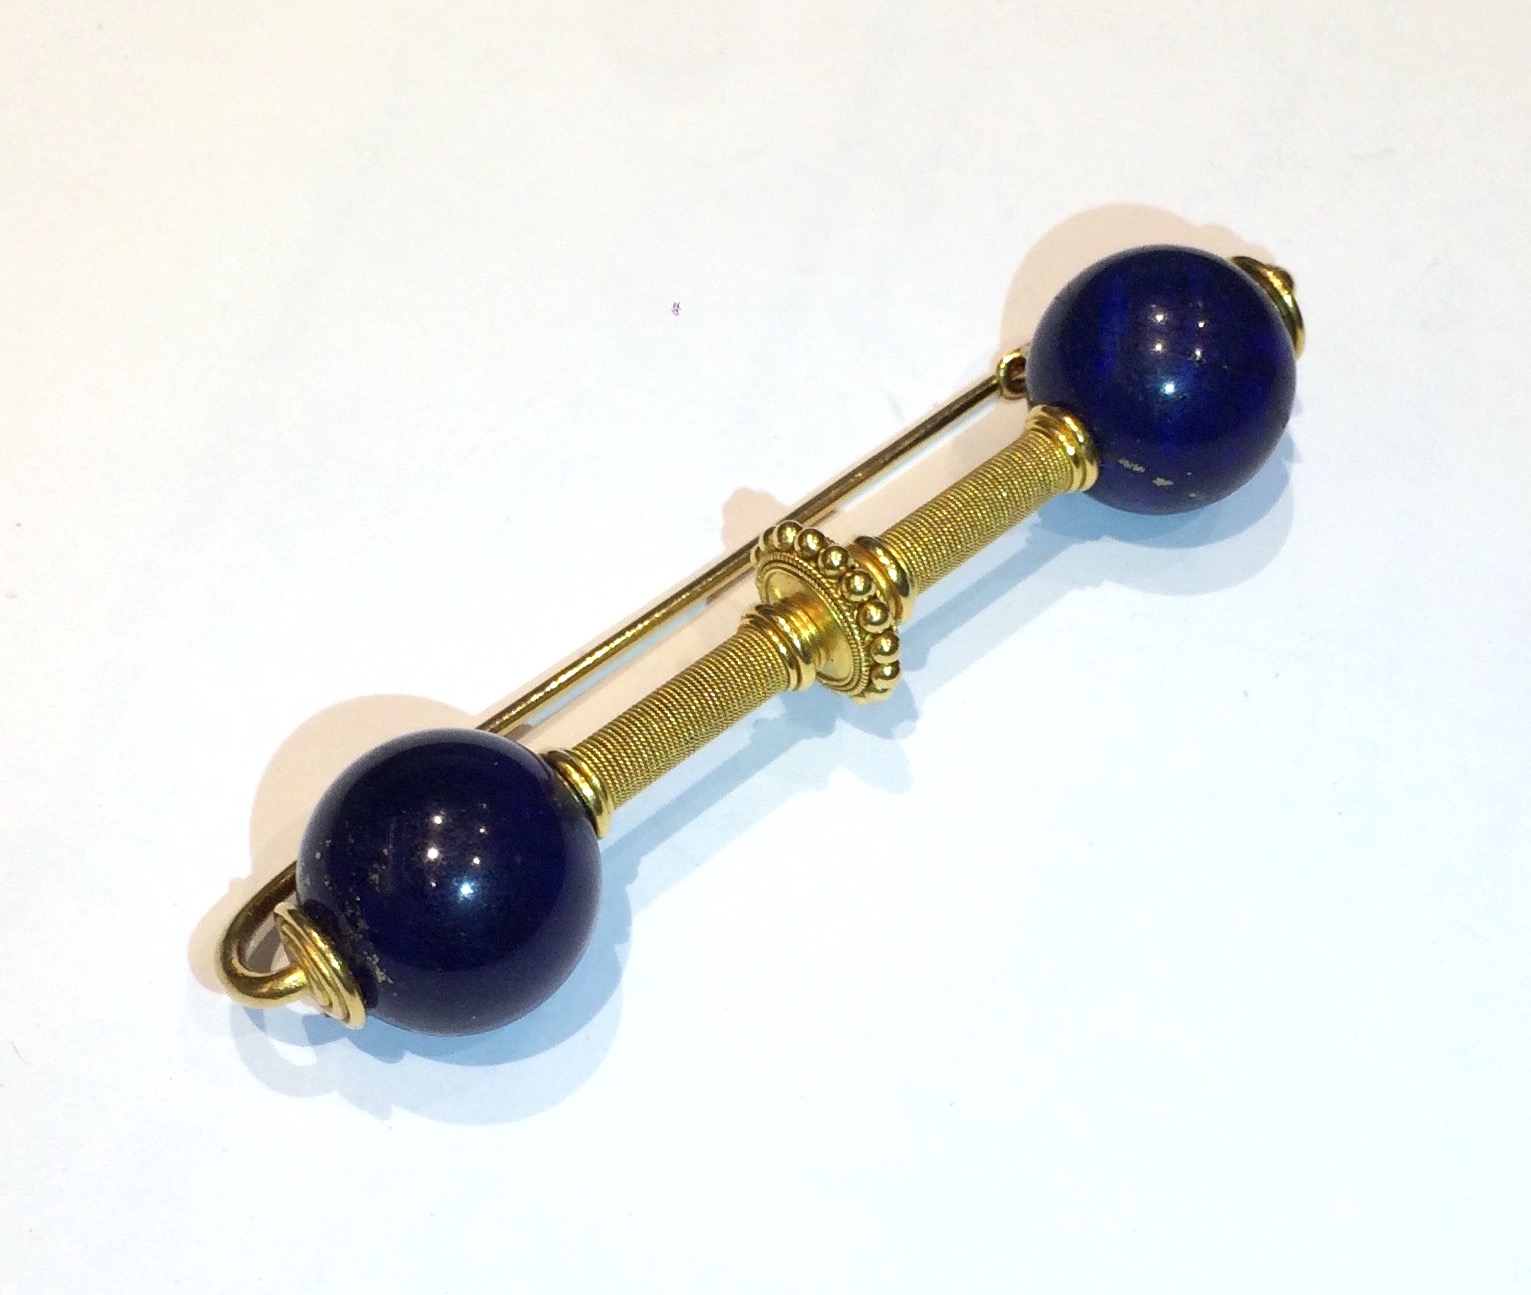 Robert Phillips (attr.) “Etruscan Revival” Fibula brooch in 18K gold with granulation and twisted rope gold details and two large lapis balls, c. 1880